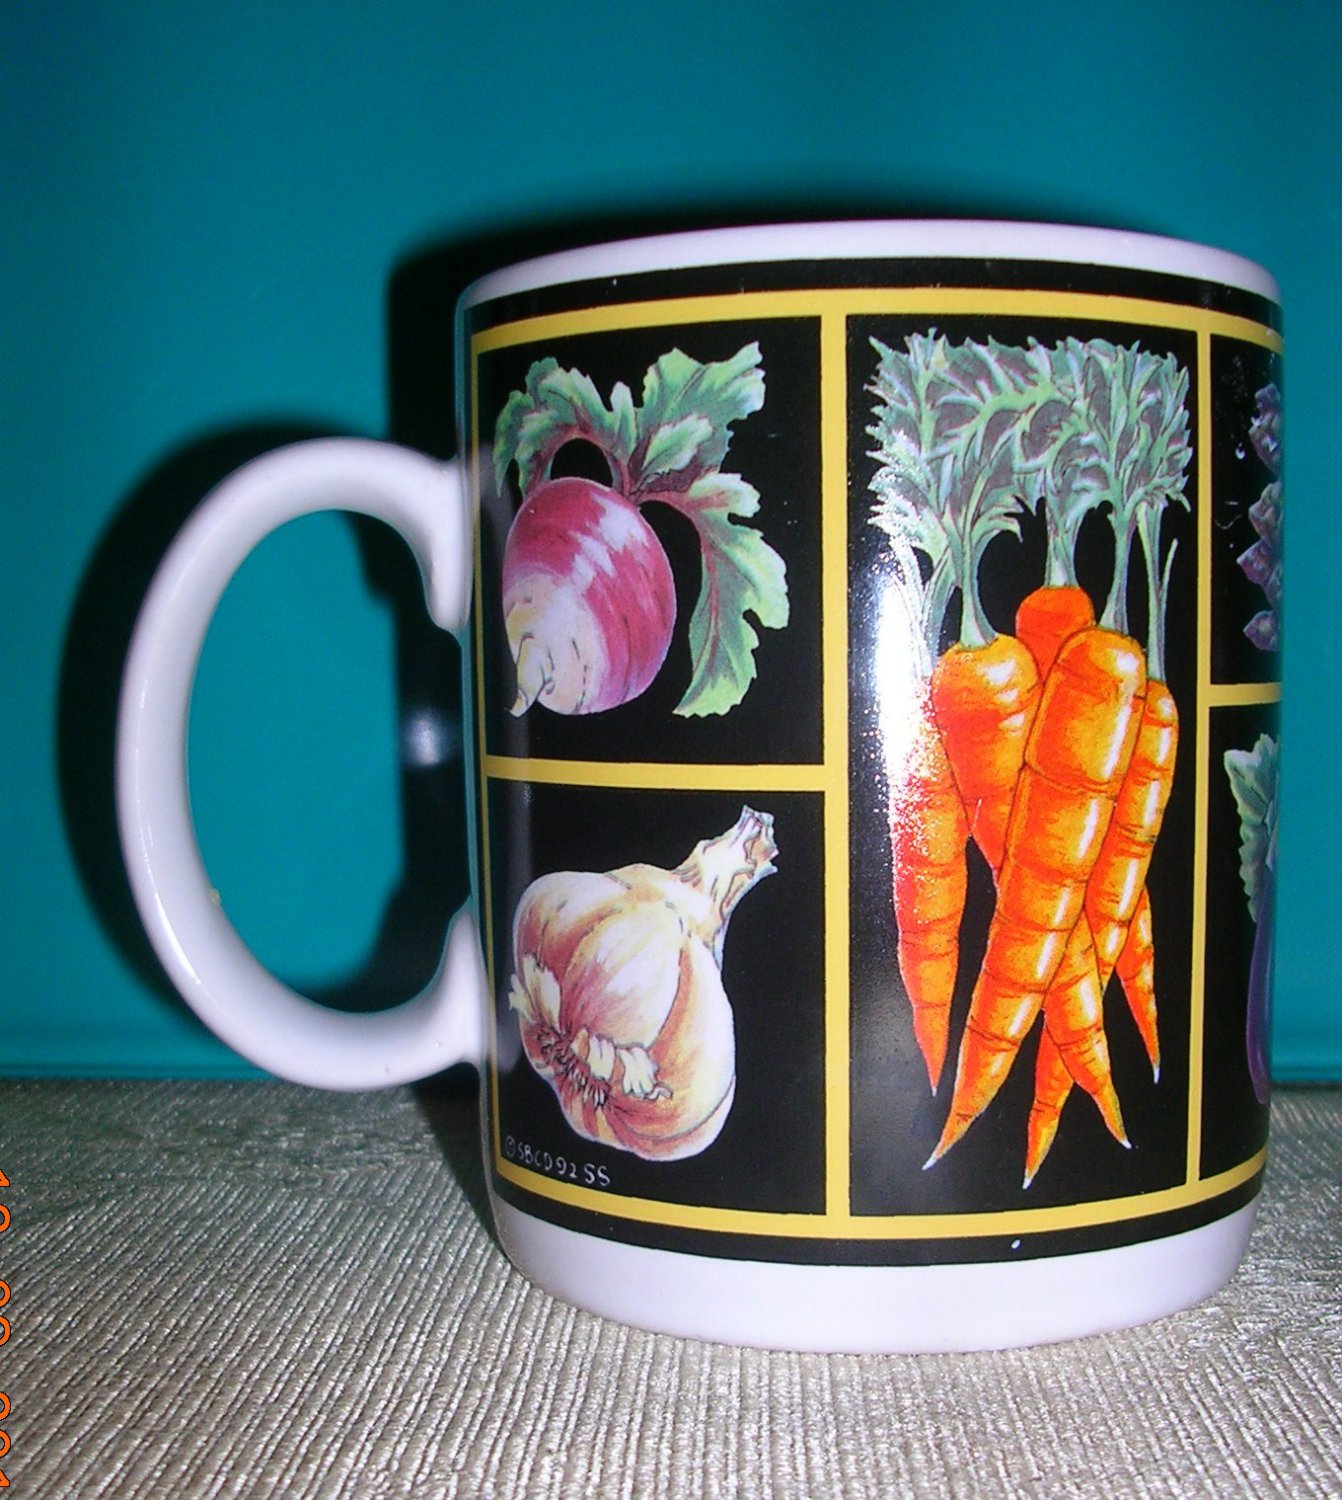 Veggie/Black Coffee Mug by Shannon Sargent, Price Includes S&H